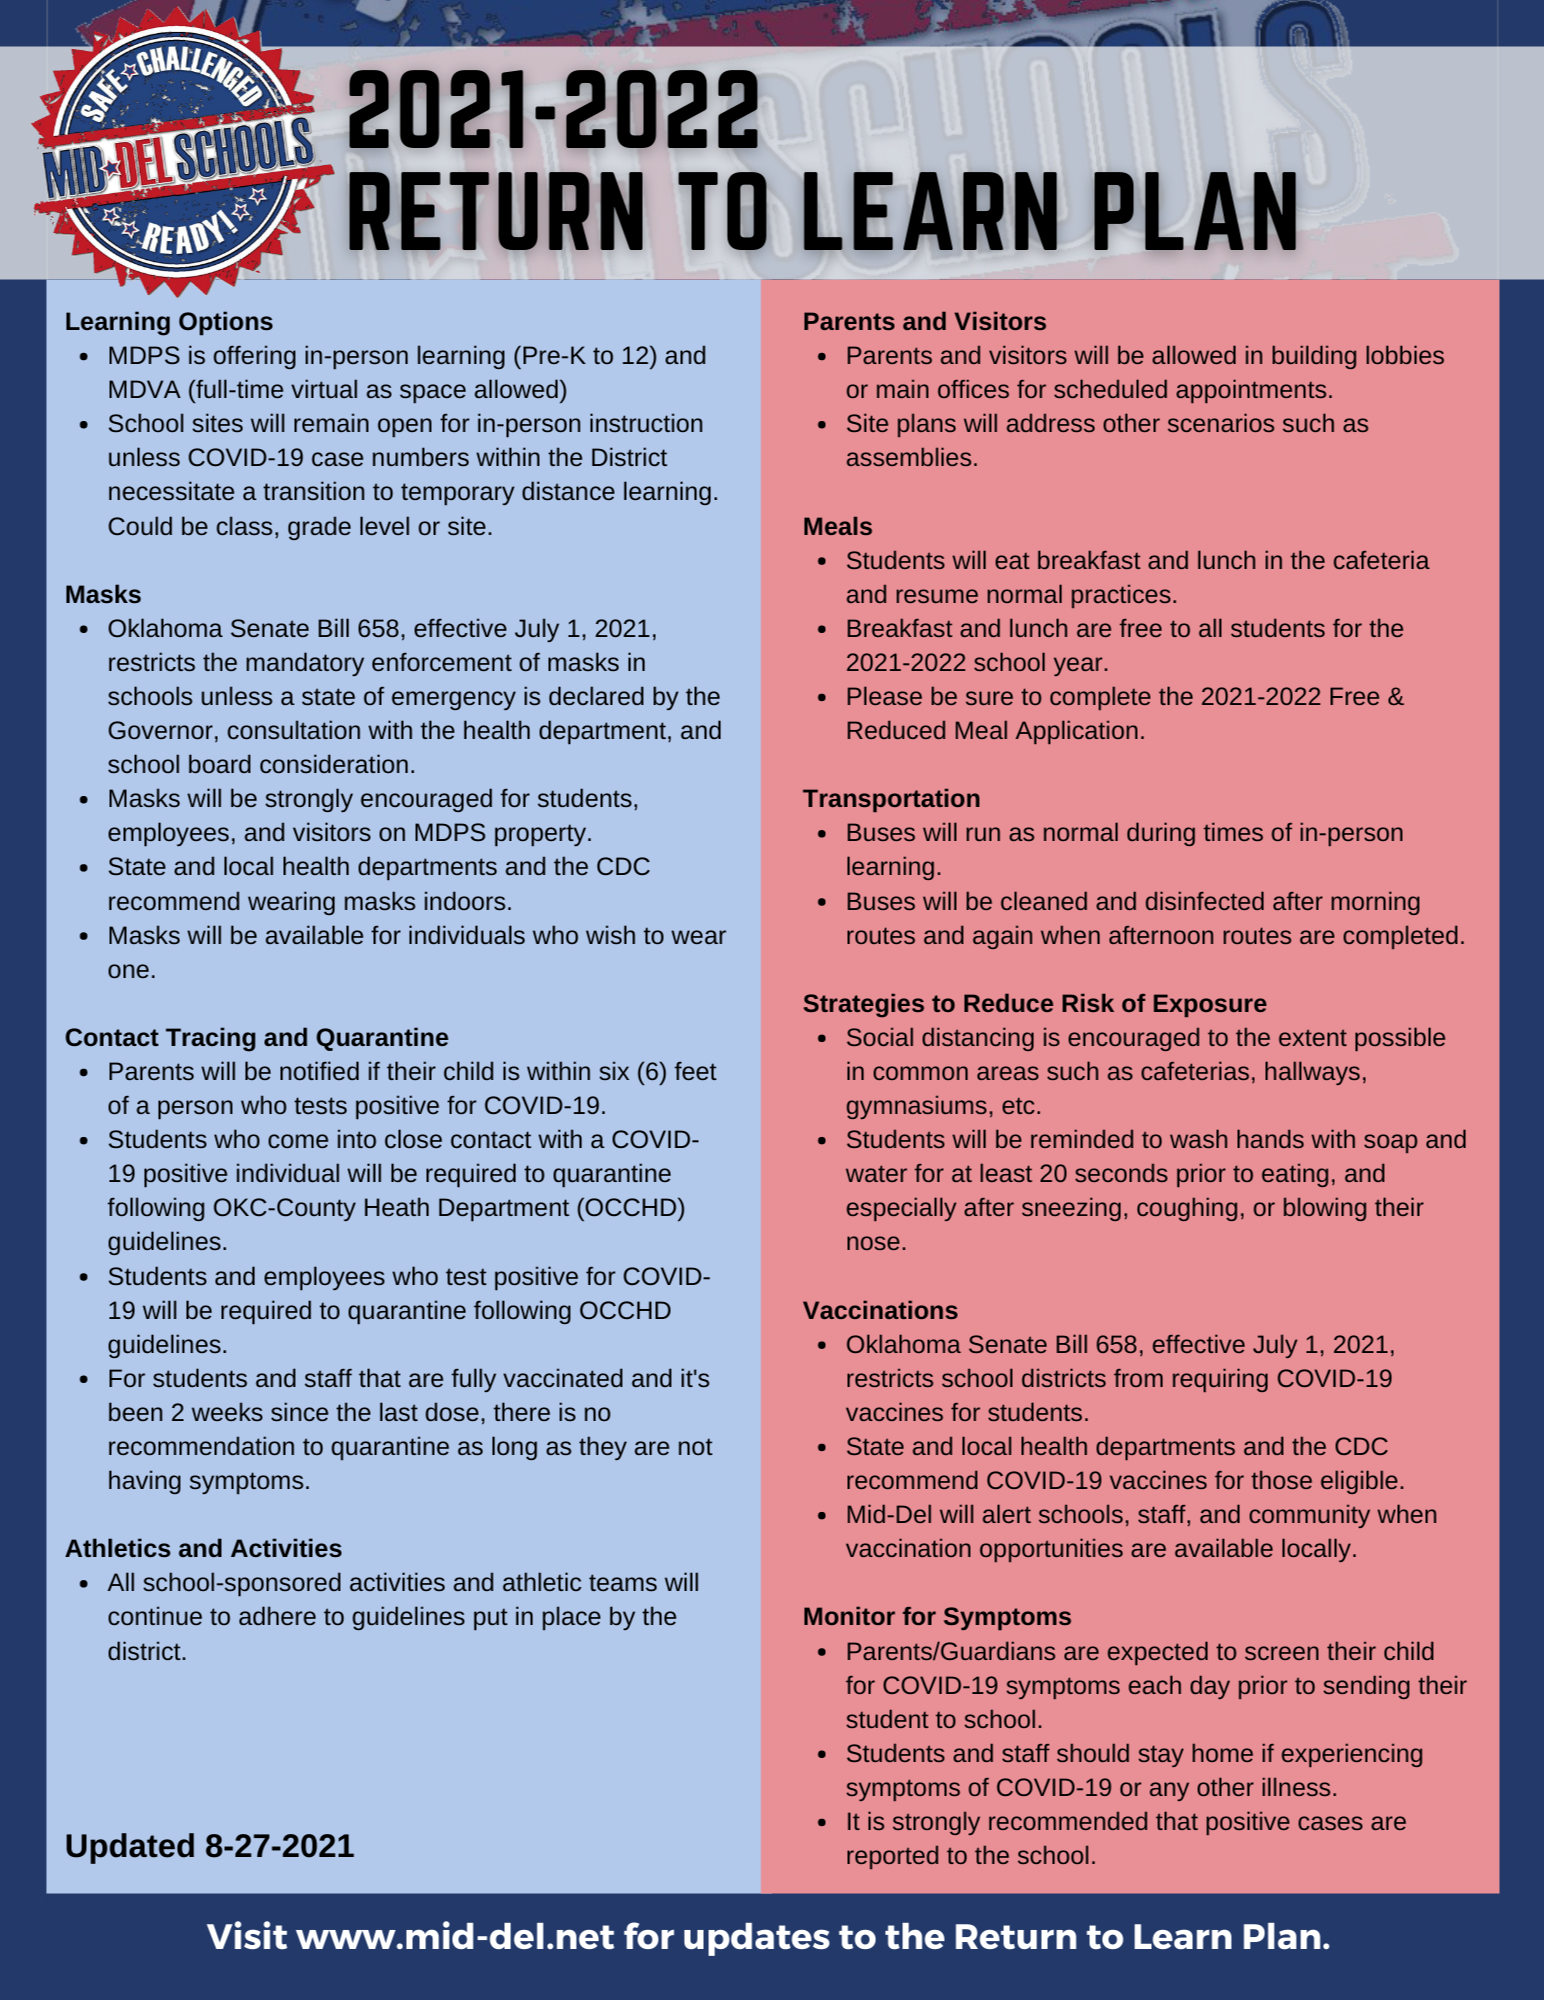 Return to Learn plan revised 8-27-21